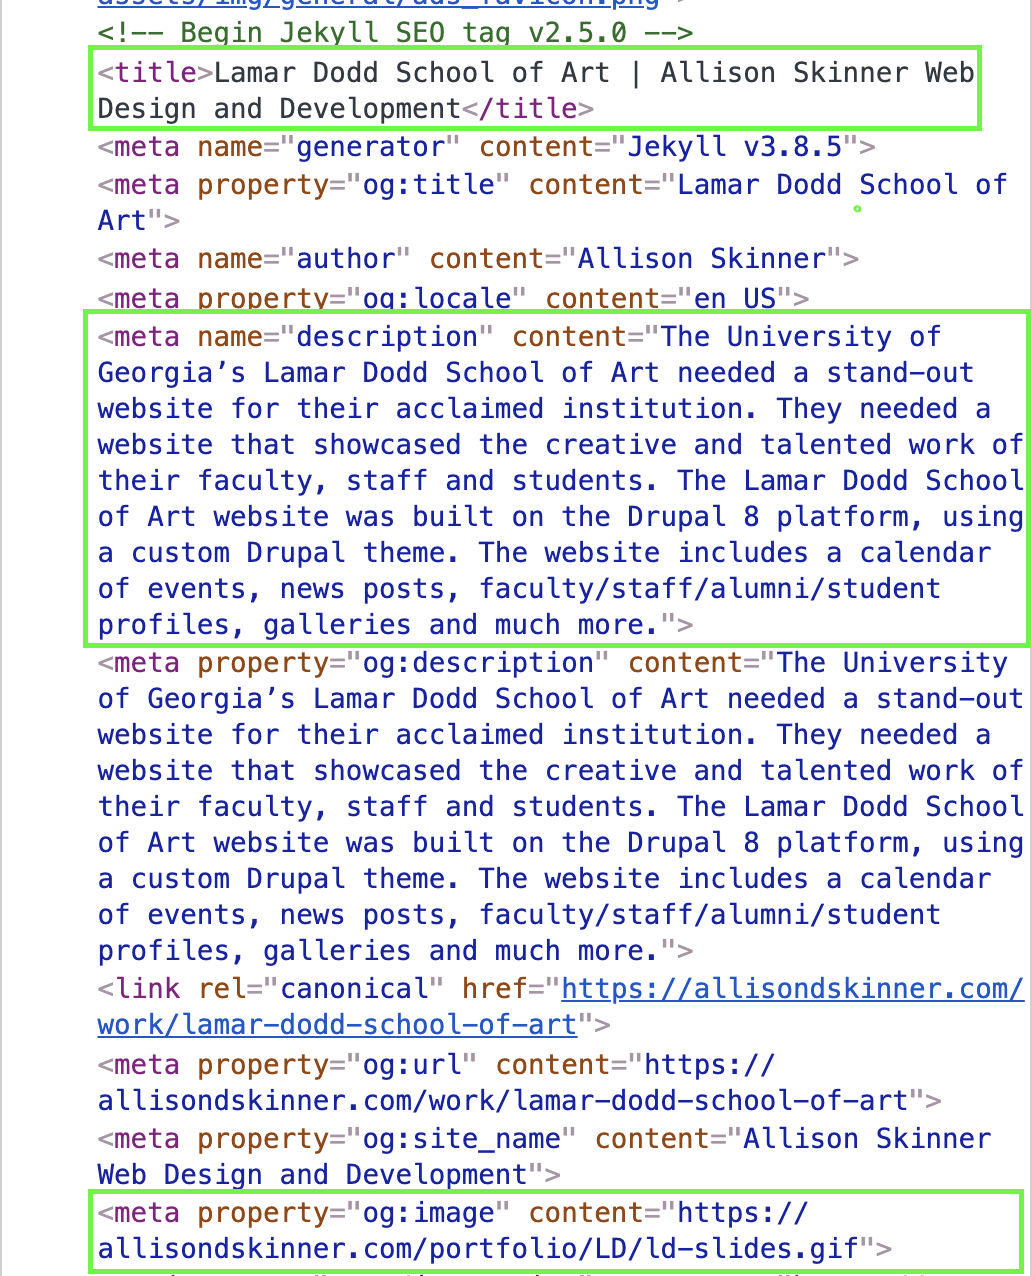 screenshot of meta information in the html head of my website. Includes site title and description